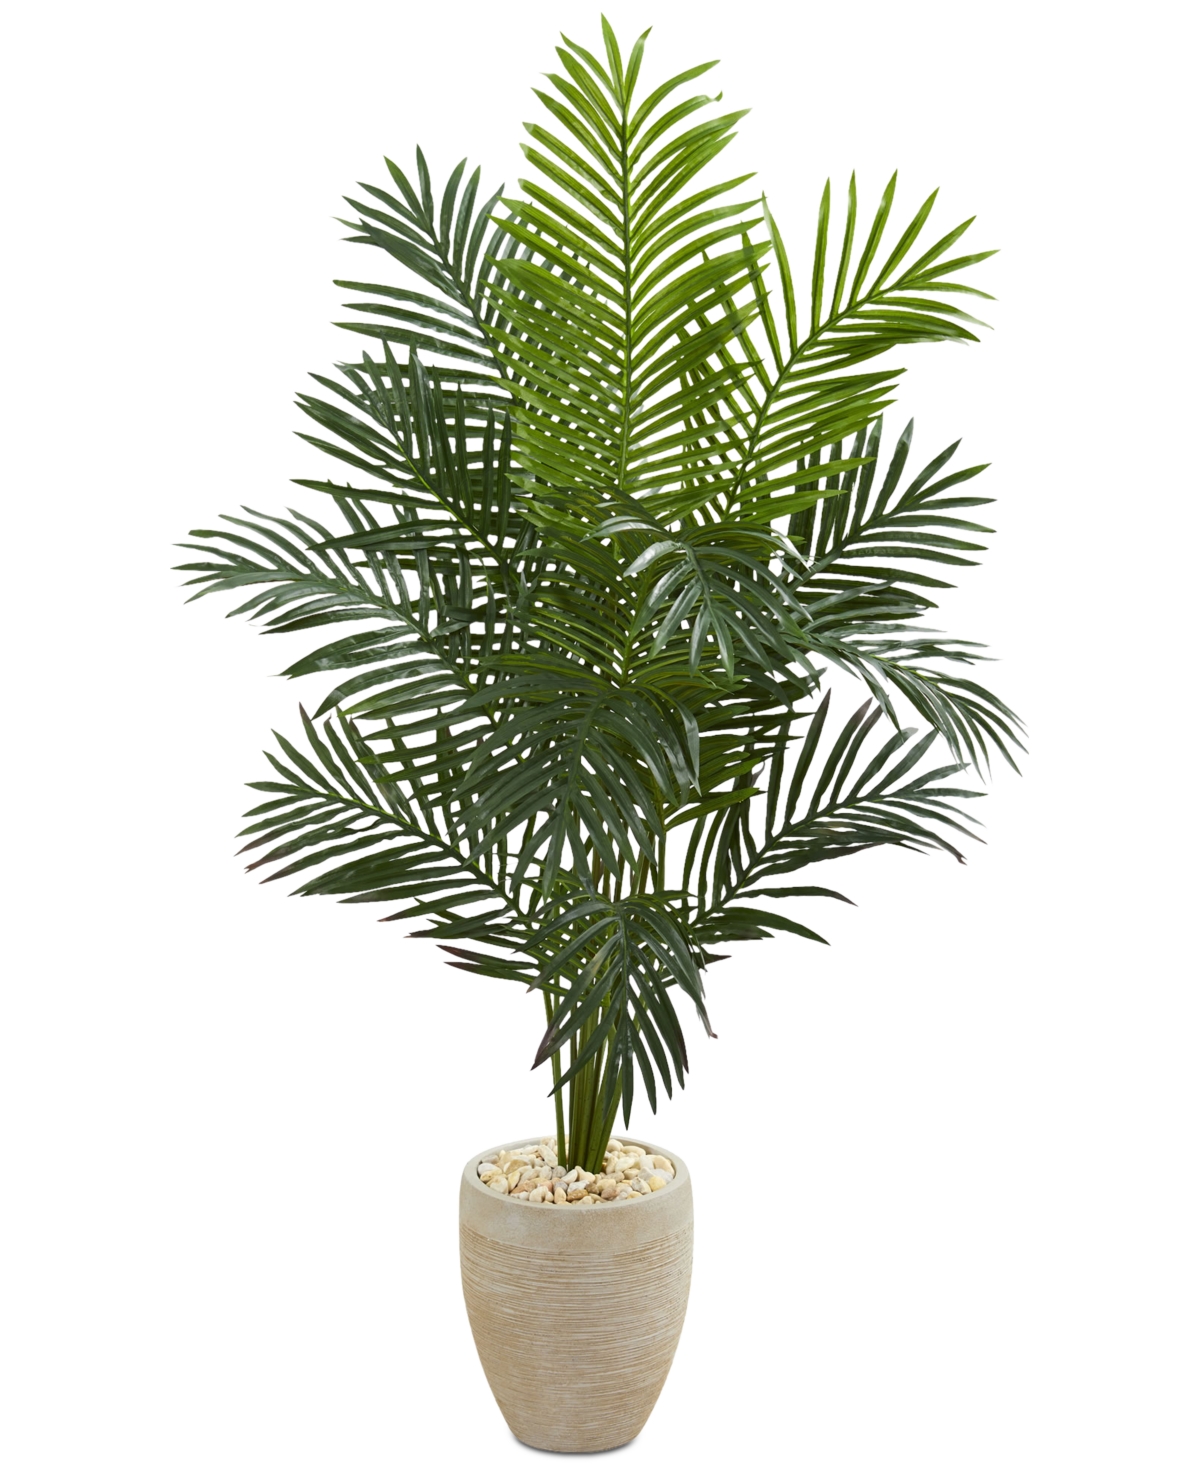 5.5' Paradise Palm Artificial Tree in Sand-Colored Planter - Green